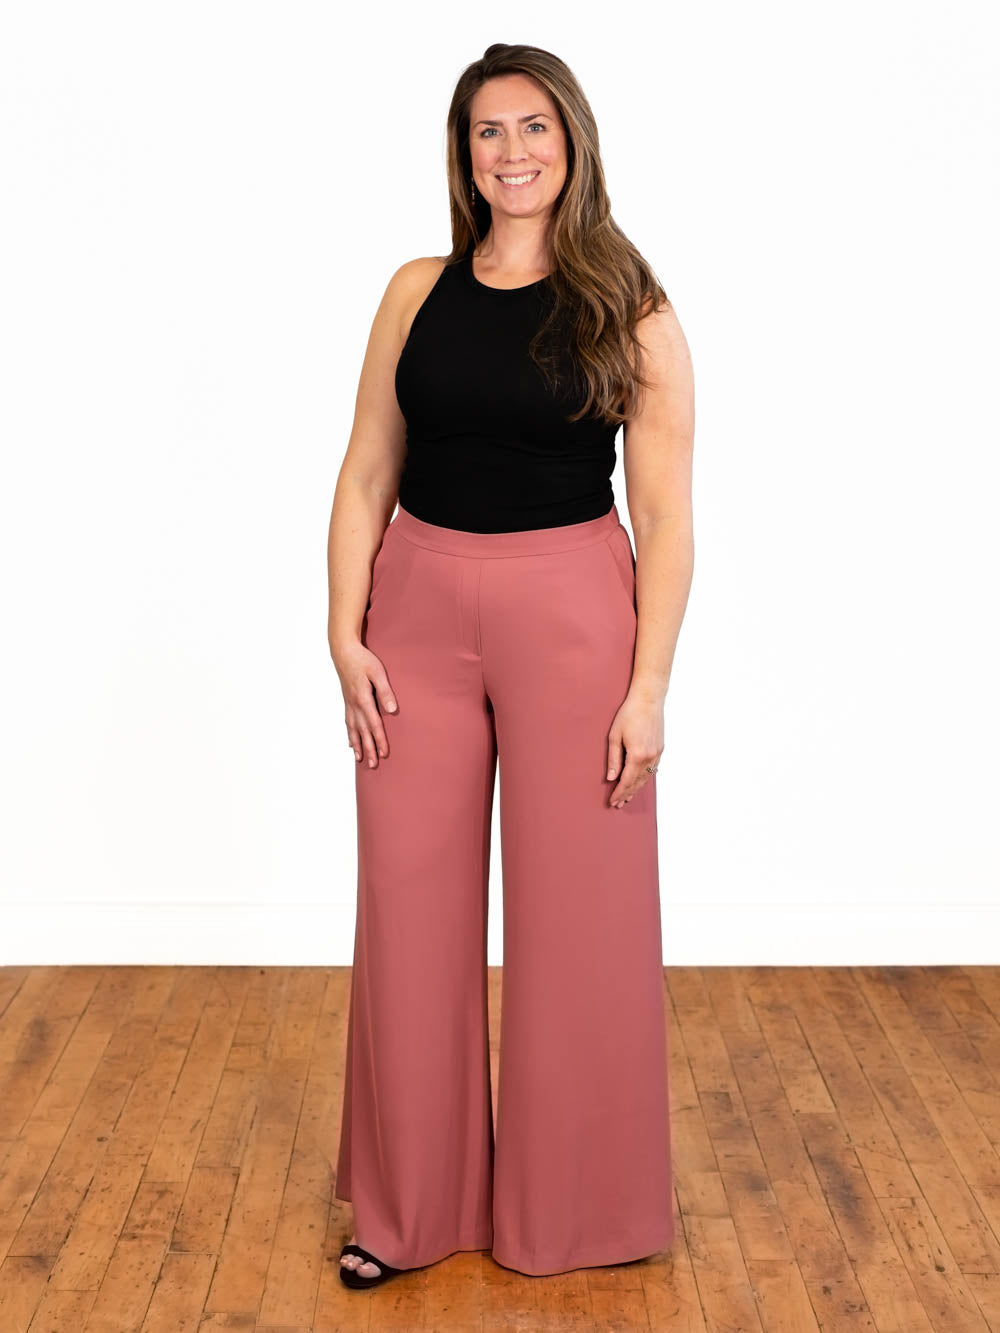 Extra Tall Women's Pants/tall Girl's Pants / Made for Tall Ladies 5'9''  6.6'' / 36''inseam/ PDF Sewing Pattern. Size: XS. S. M. L. XL. -  Norway